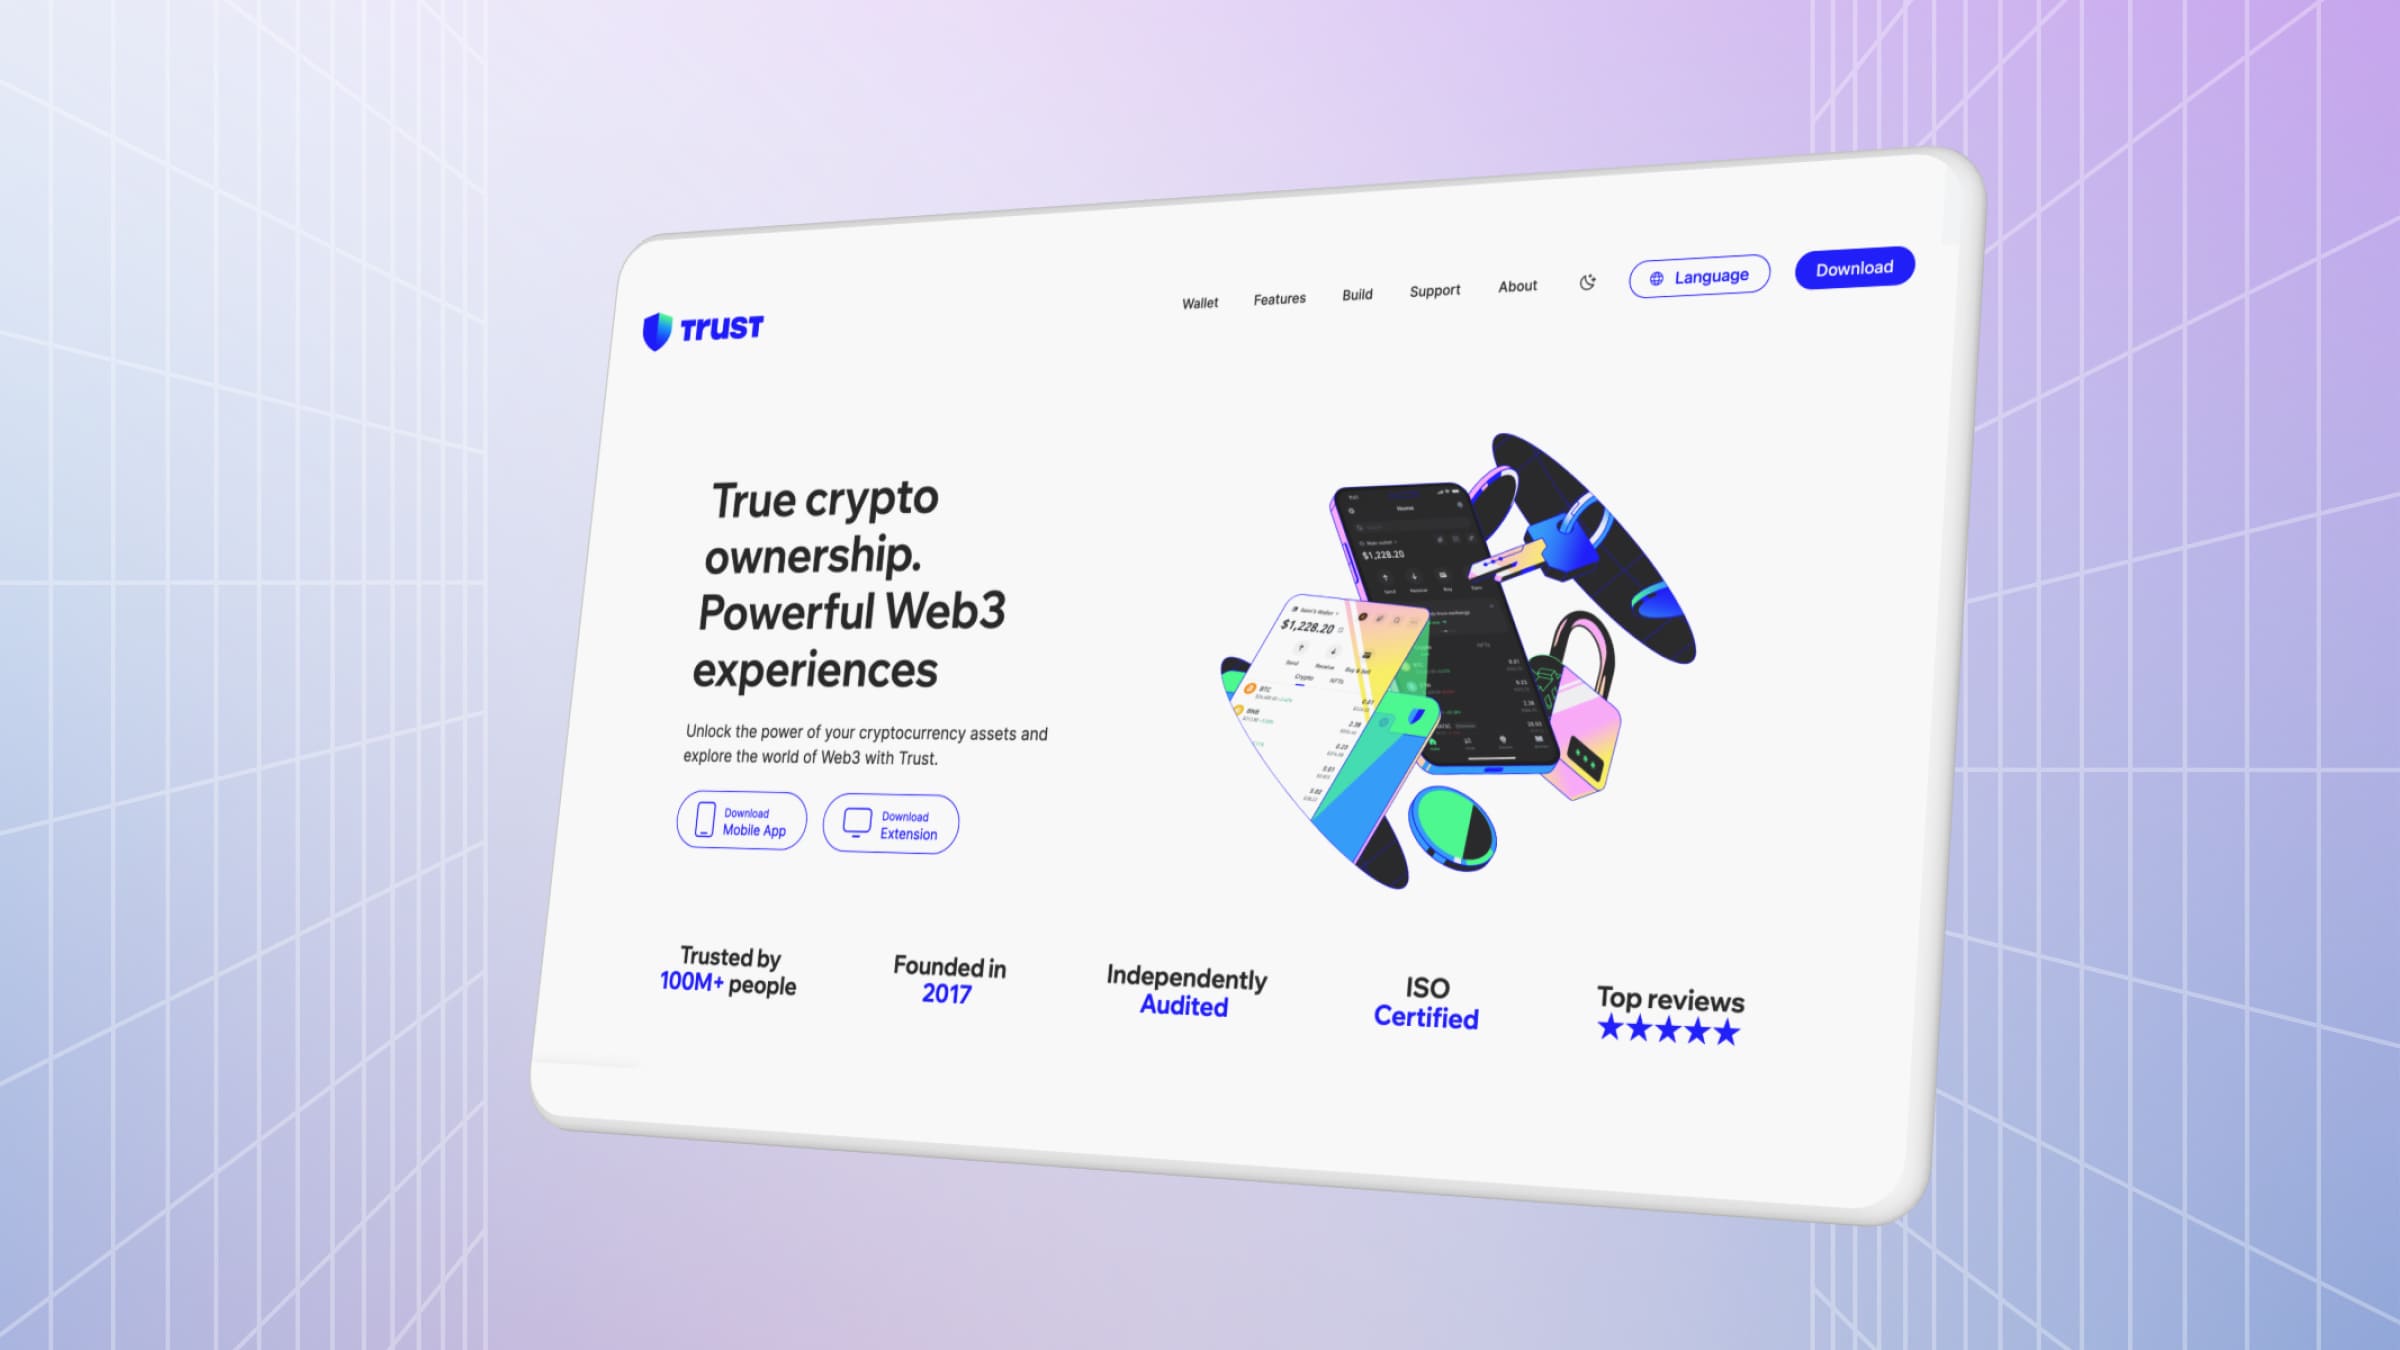 Trust Wallet is a popular cryptocurrency wallet from the Binance exchange.